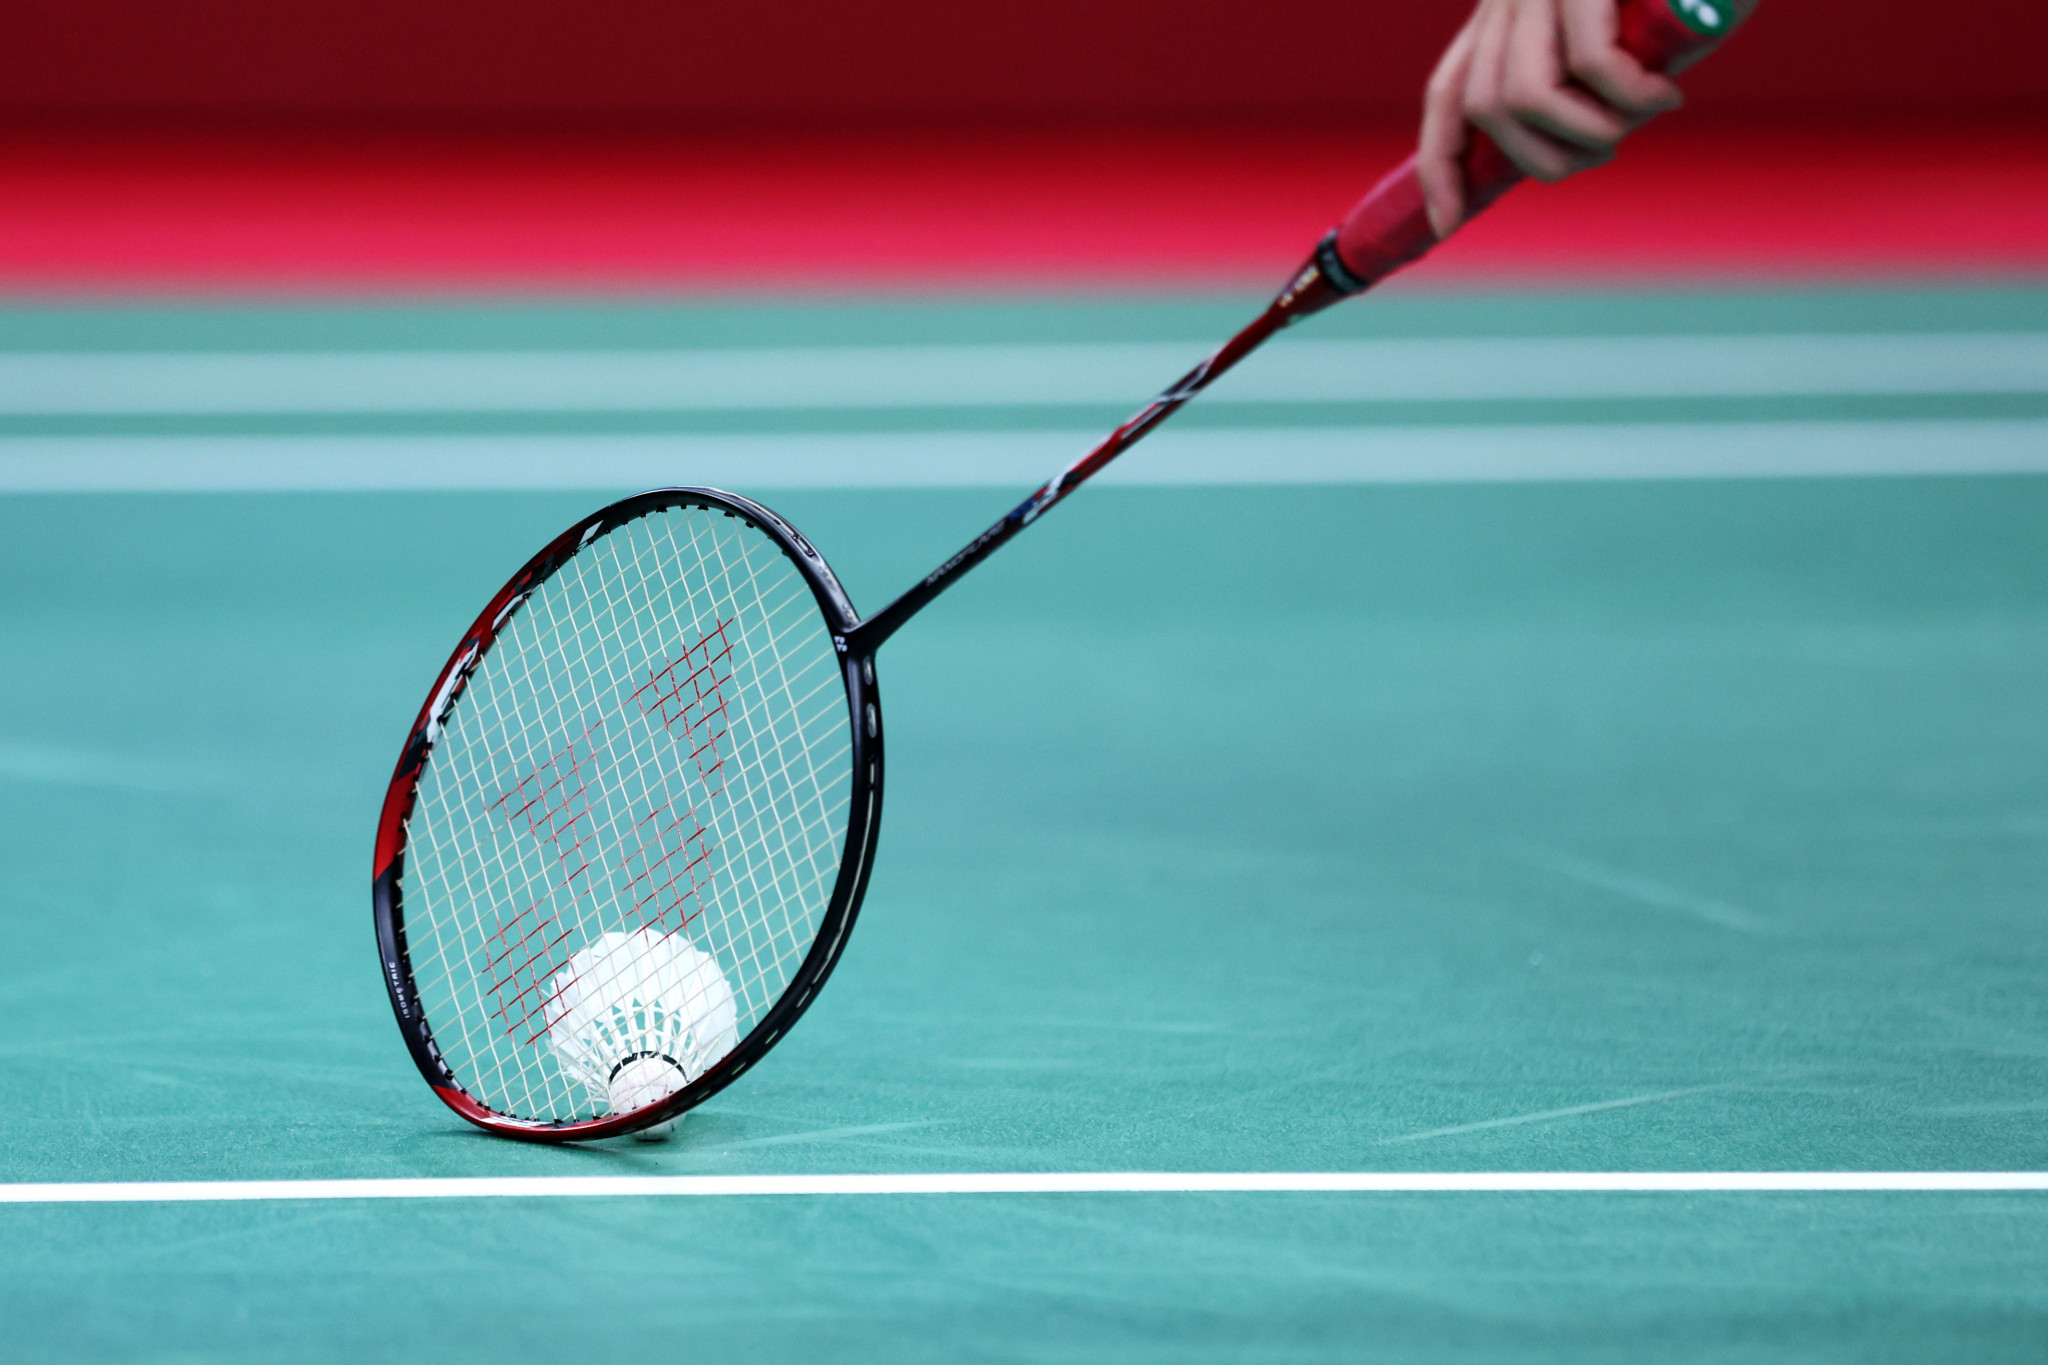 Manila is set to host the Badminton Asia Championships from April 26 to May 1 ©Getty Images